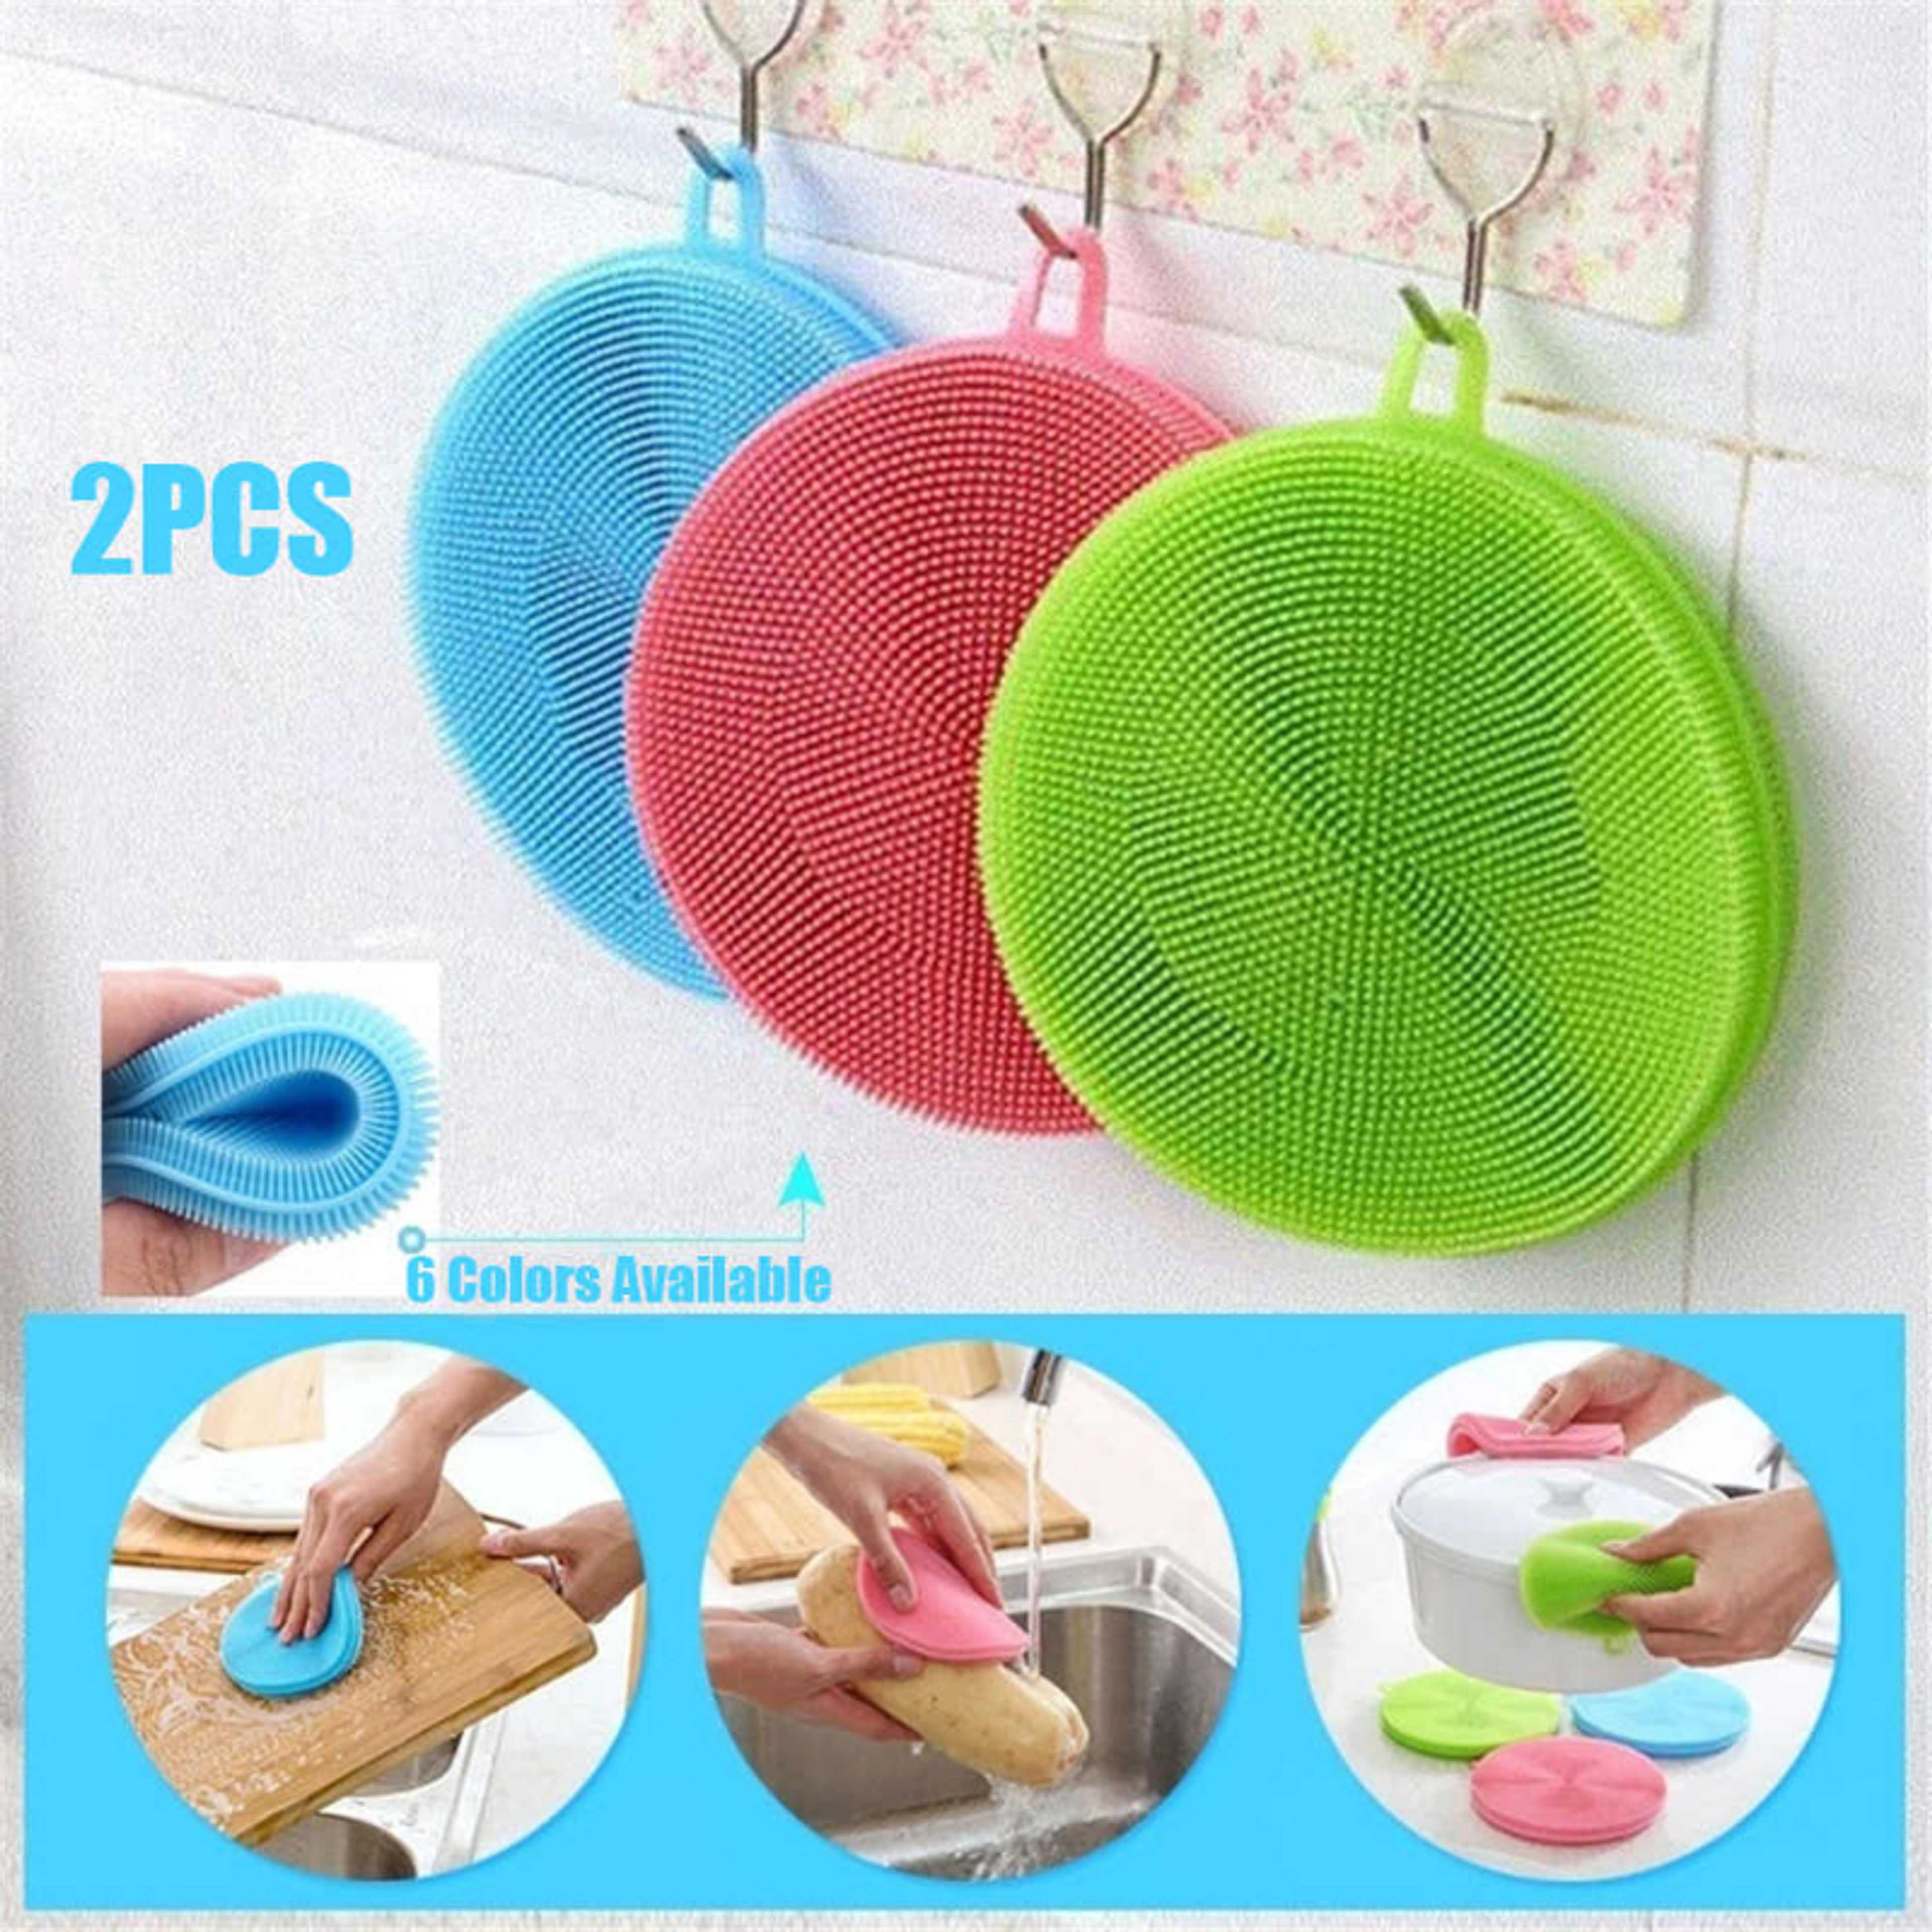 Pack of 2 Double Side Silicone Kitchen Cleaning Brush Dishwasher Sponges